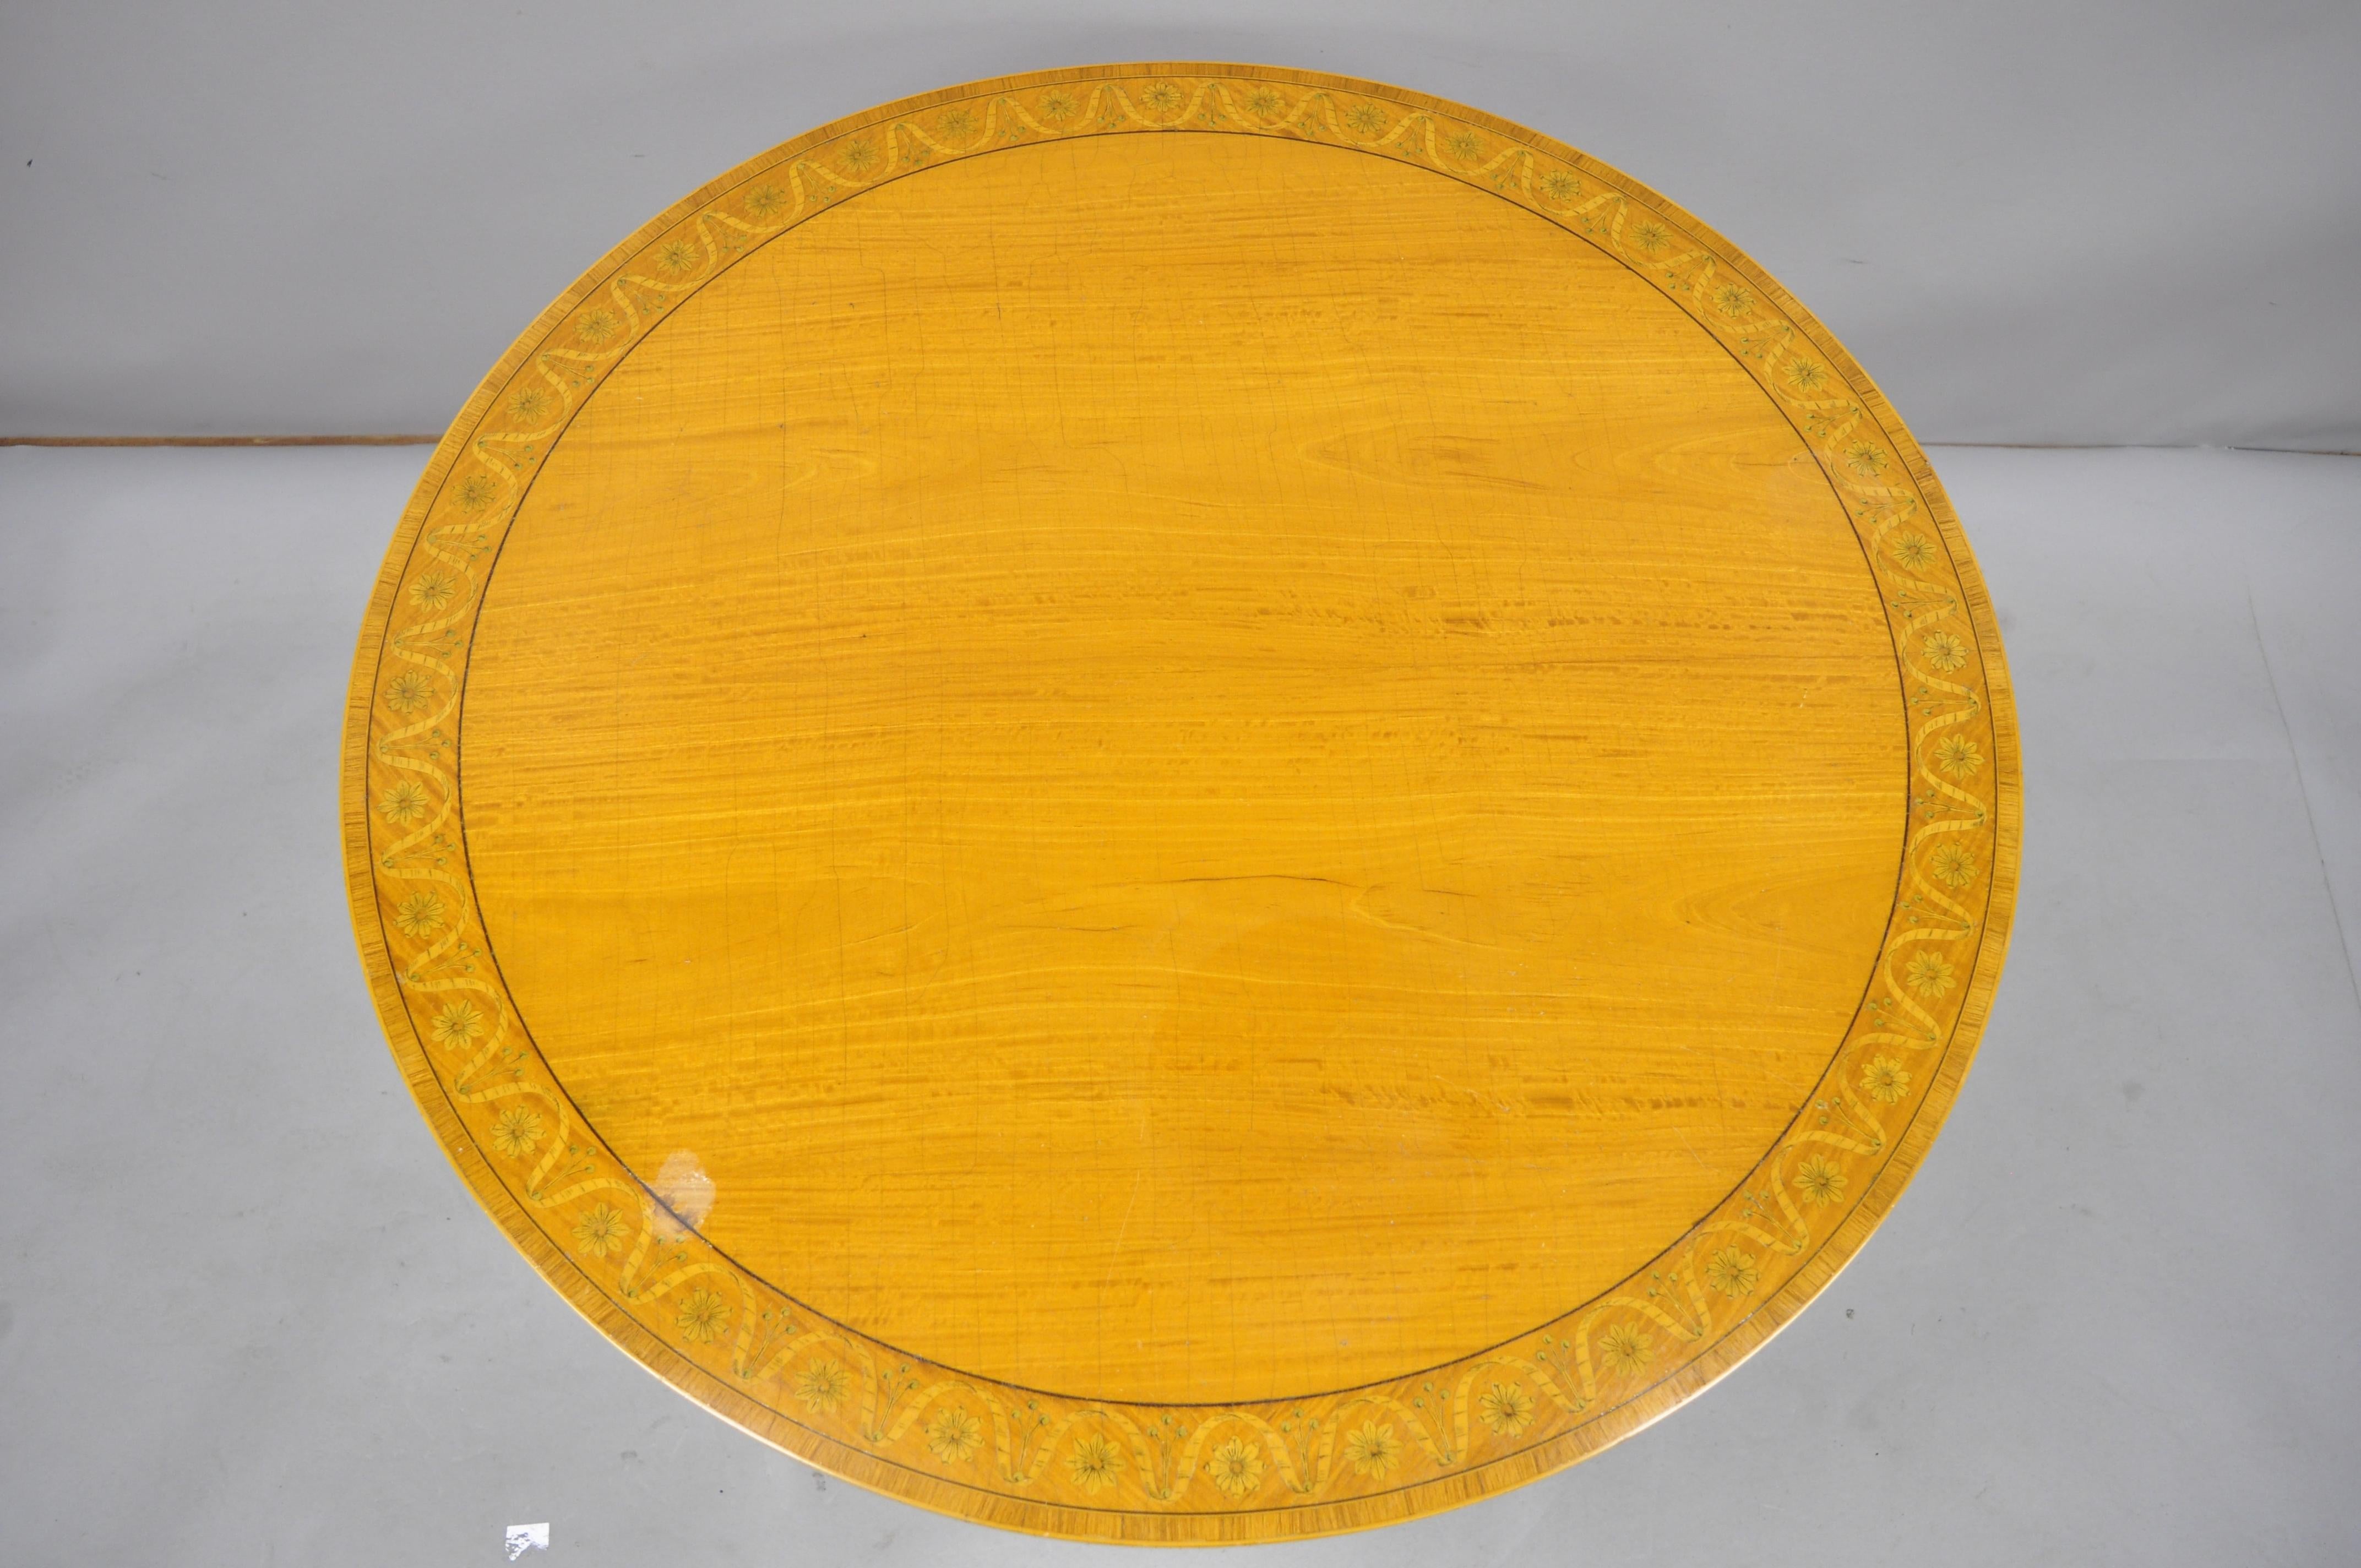 Antique Edwardian satinwood inlaid round banded center breakfast table. Listing features pencil inlay, banded top, ribbon and floral inlay, tapered legs, very nice antique item. Great for use as a center/game table or small breakfast table, circa